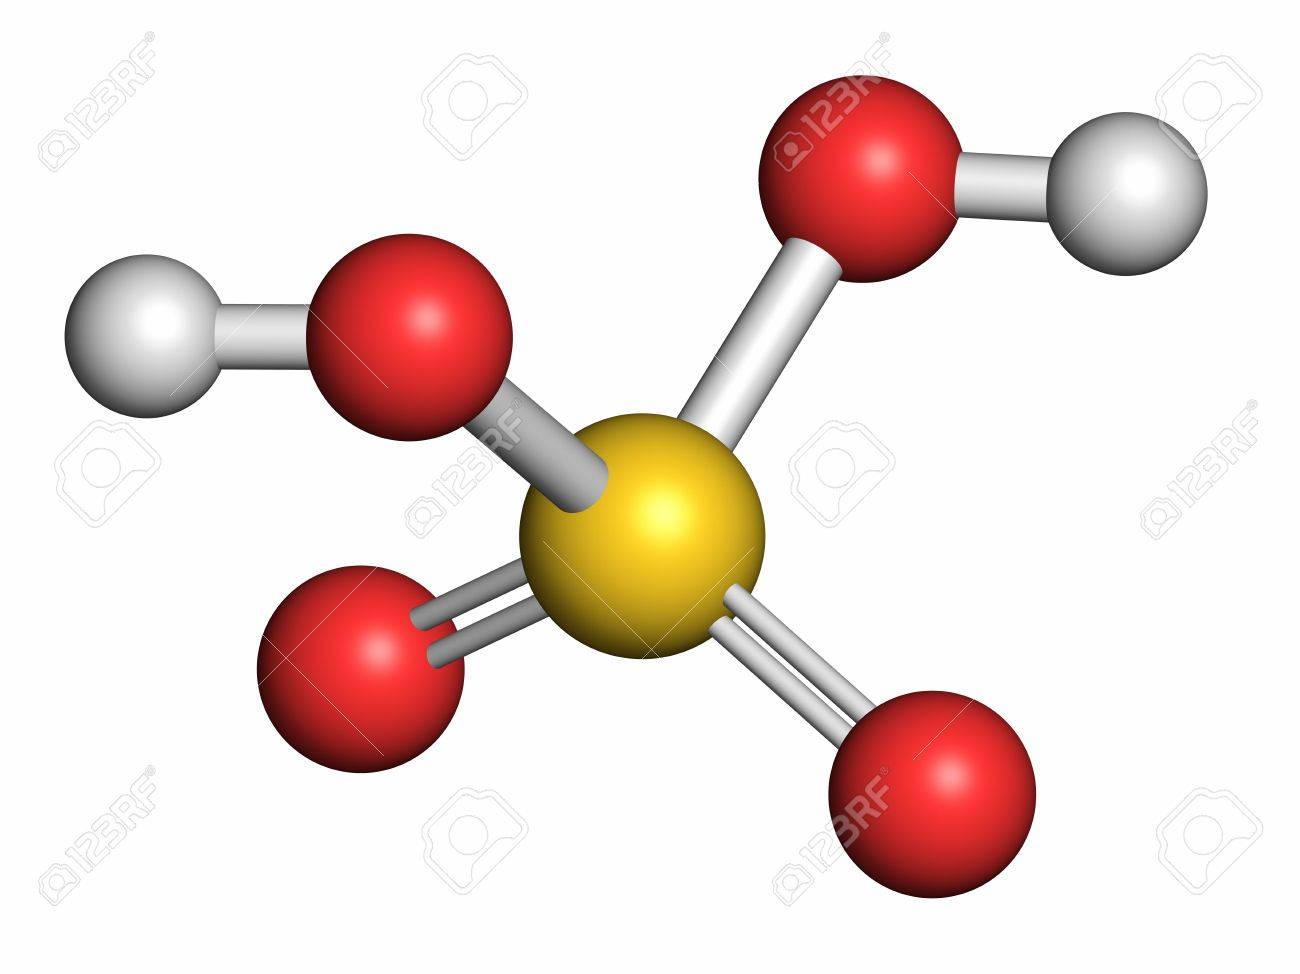 84760874-sulfuric-acid-h2so4-strong-mineral-acid-molecule-atoms-are-represented-as-spheres-with-conventional-.jpg